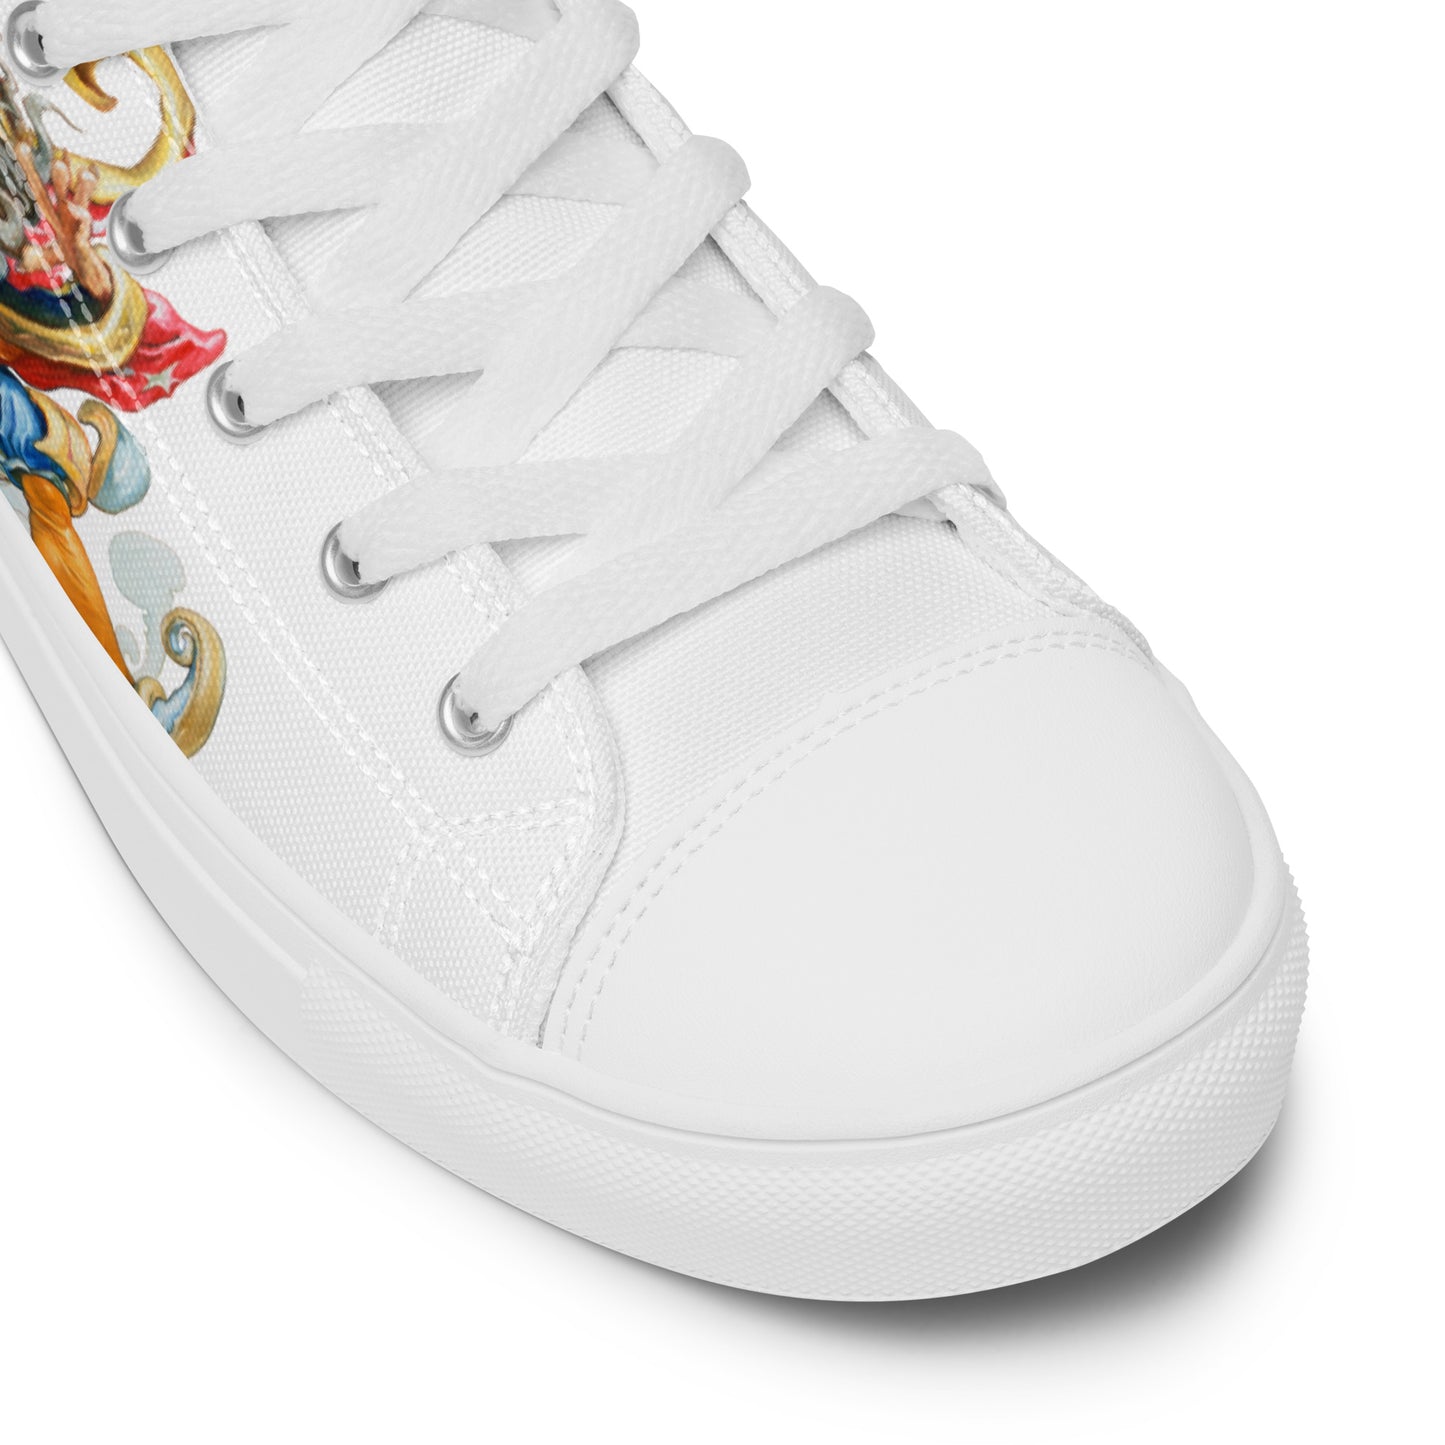 Men’s Rincewind Running High Top Canvas Shoes - Free Shipping *US SIZES SHOWN! USE CHART!